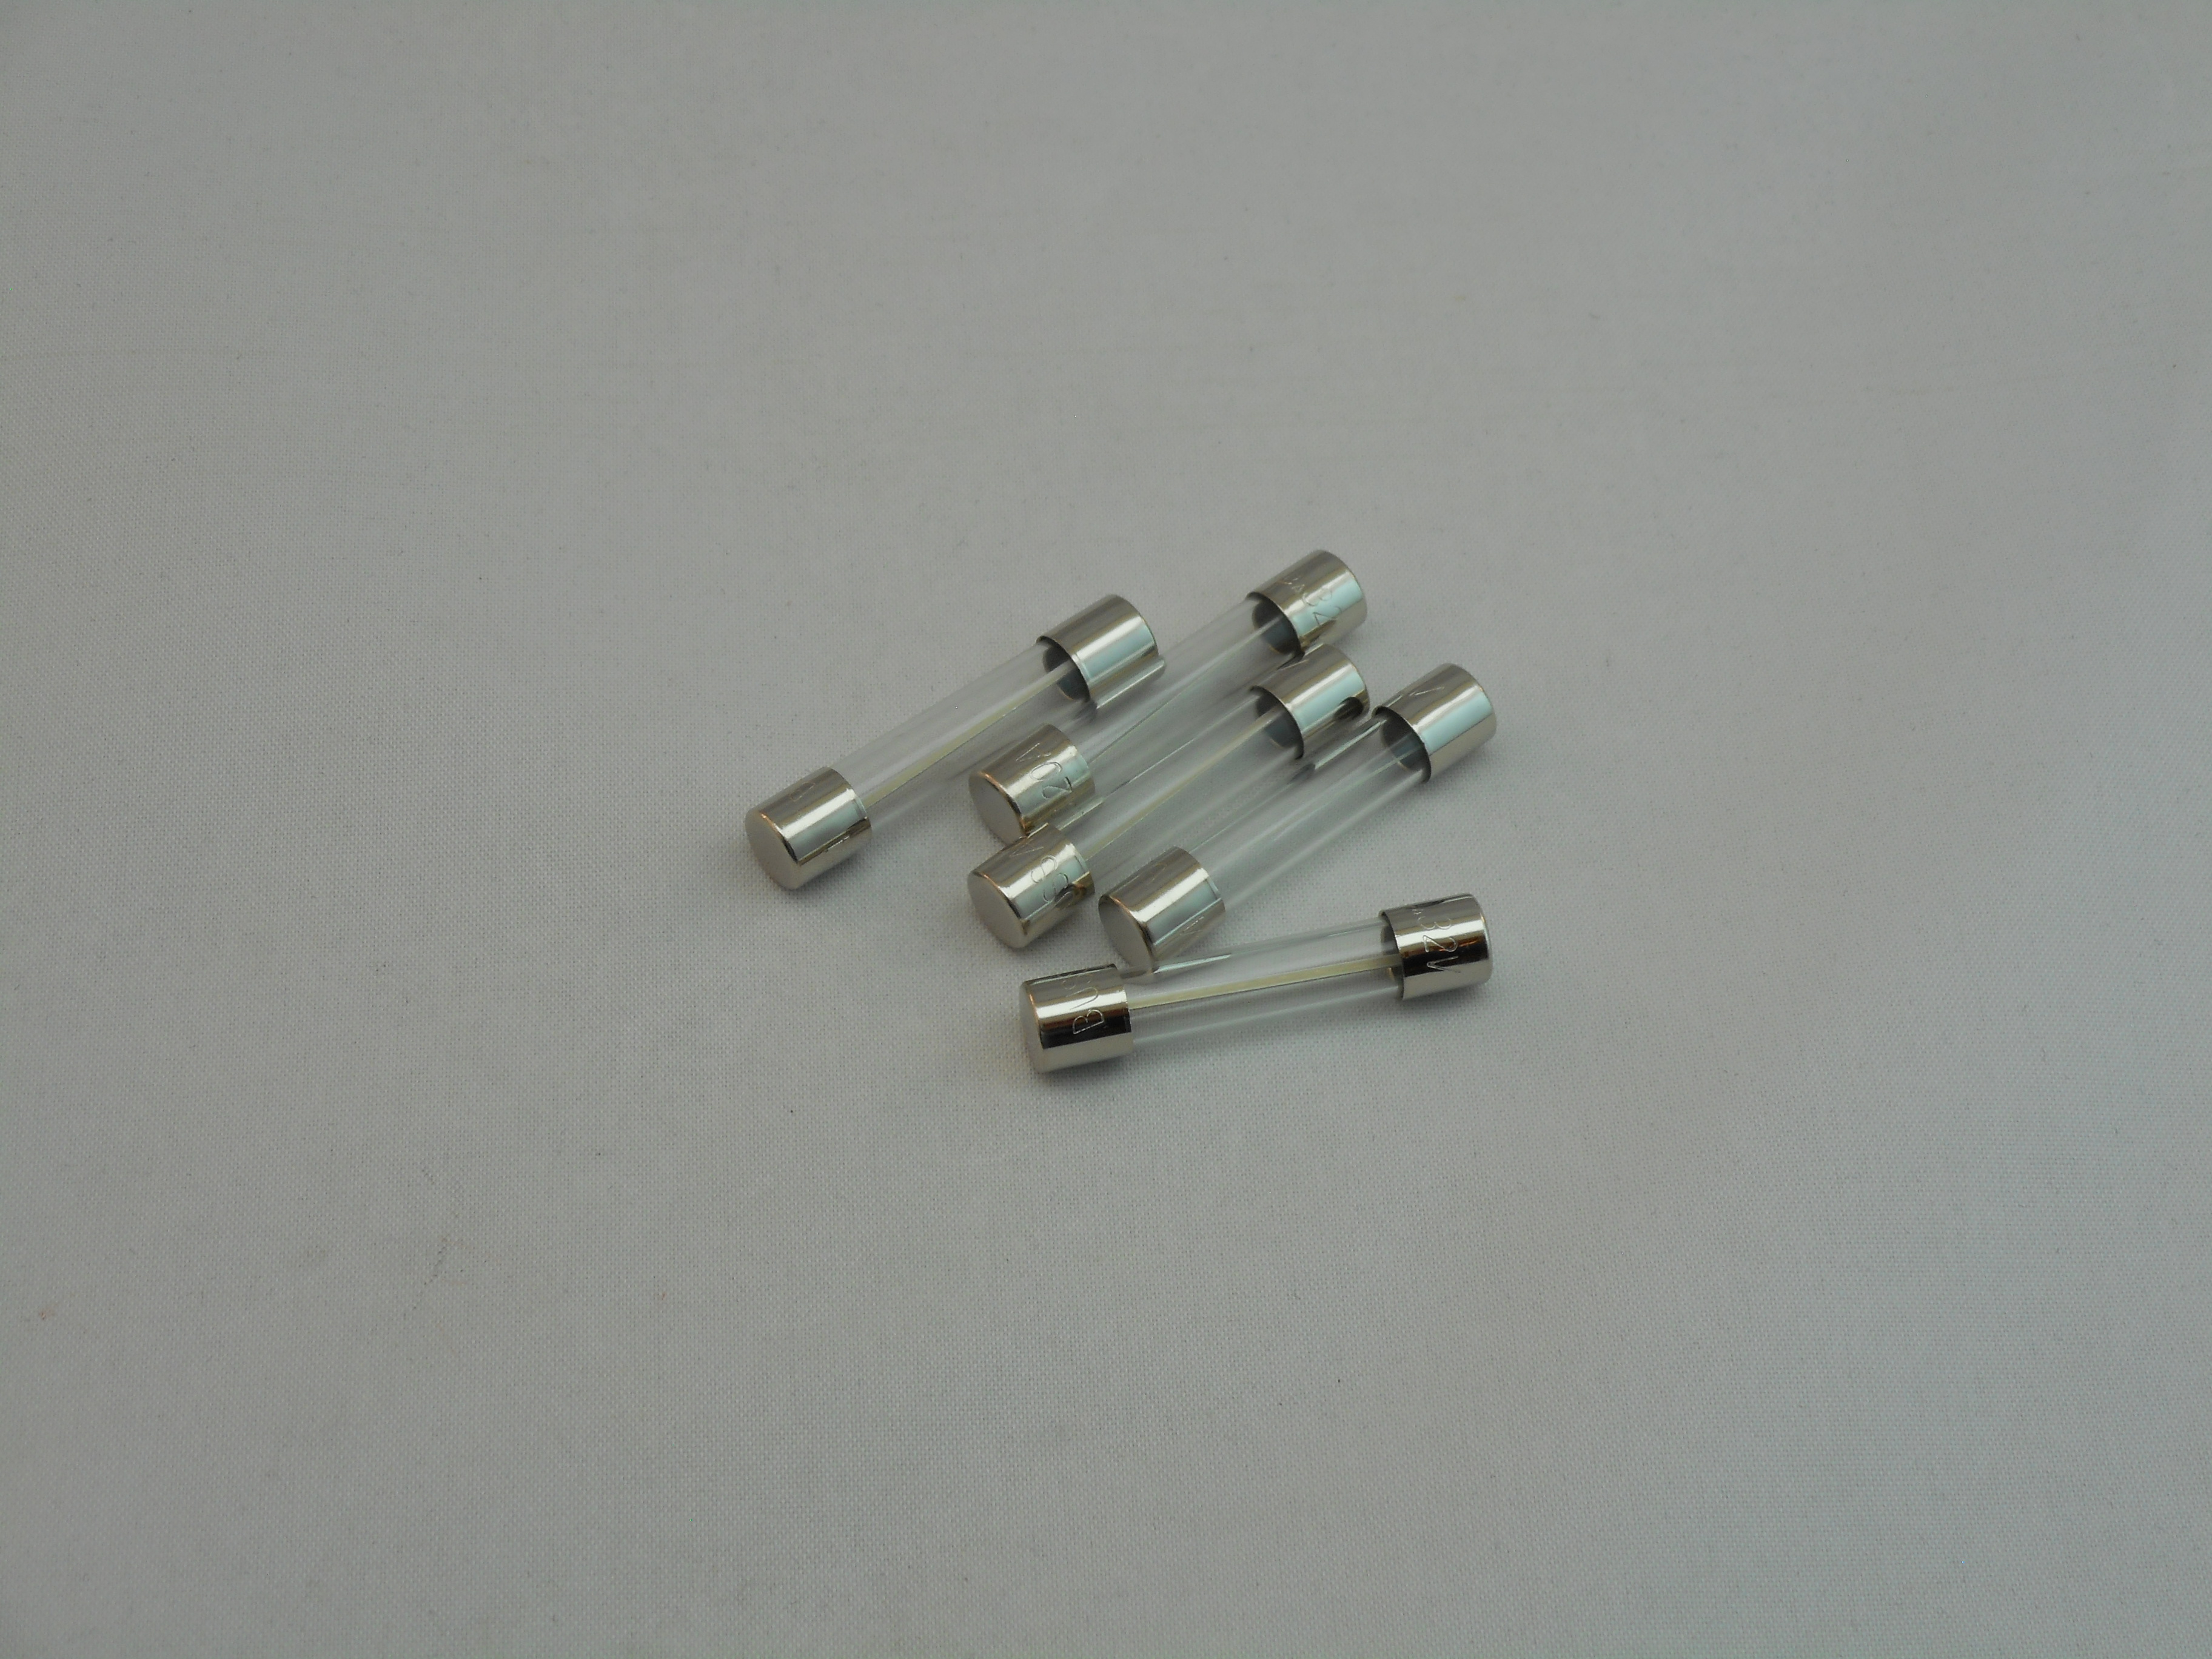 20A Fast Blow 3AG Fuse (5 Piece Package) Arcade Parts and Repair